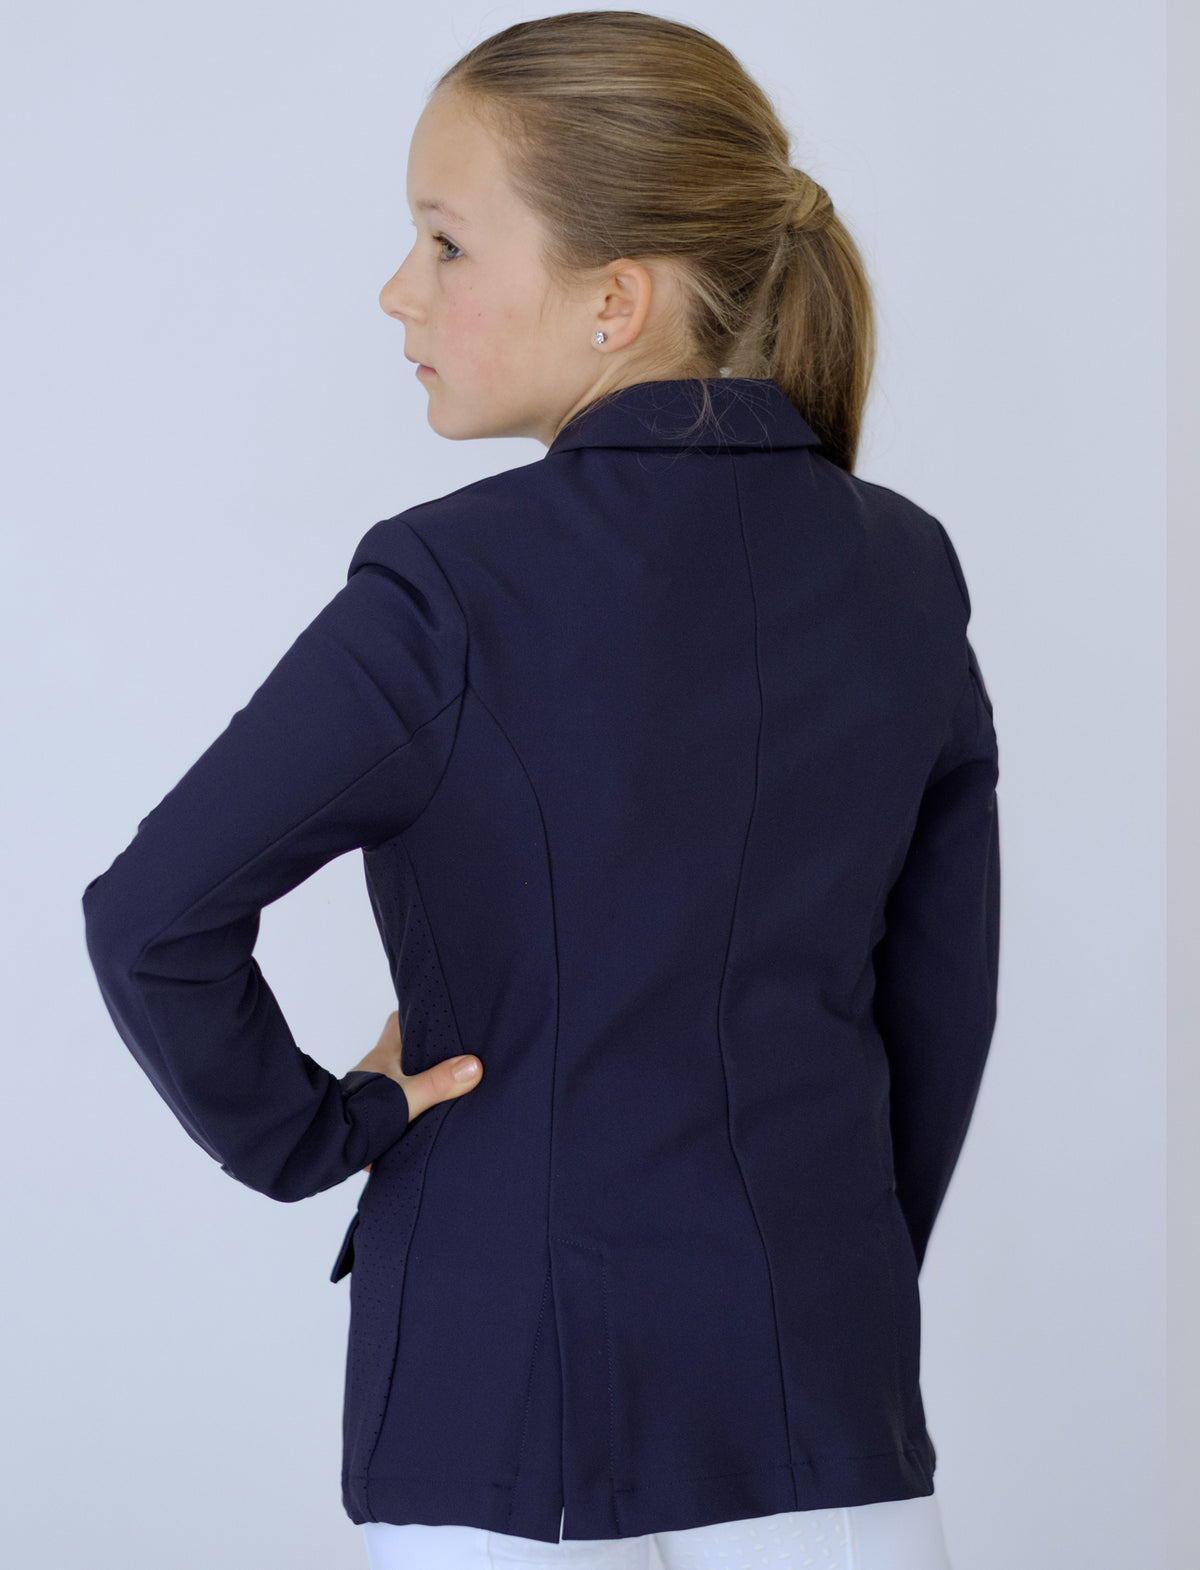 YR NAVY PERFORMANCE COMPETITION JACKET